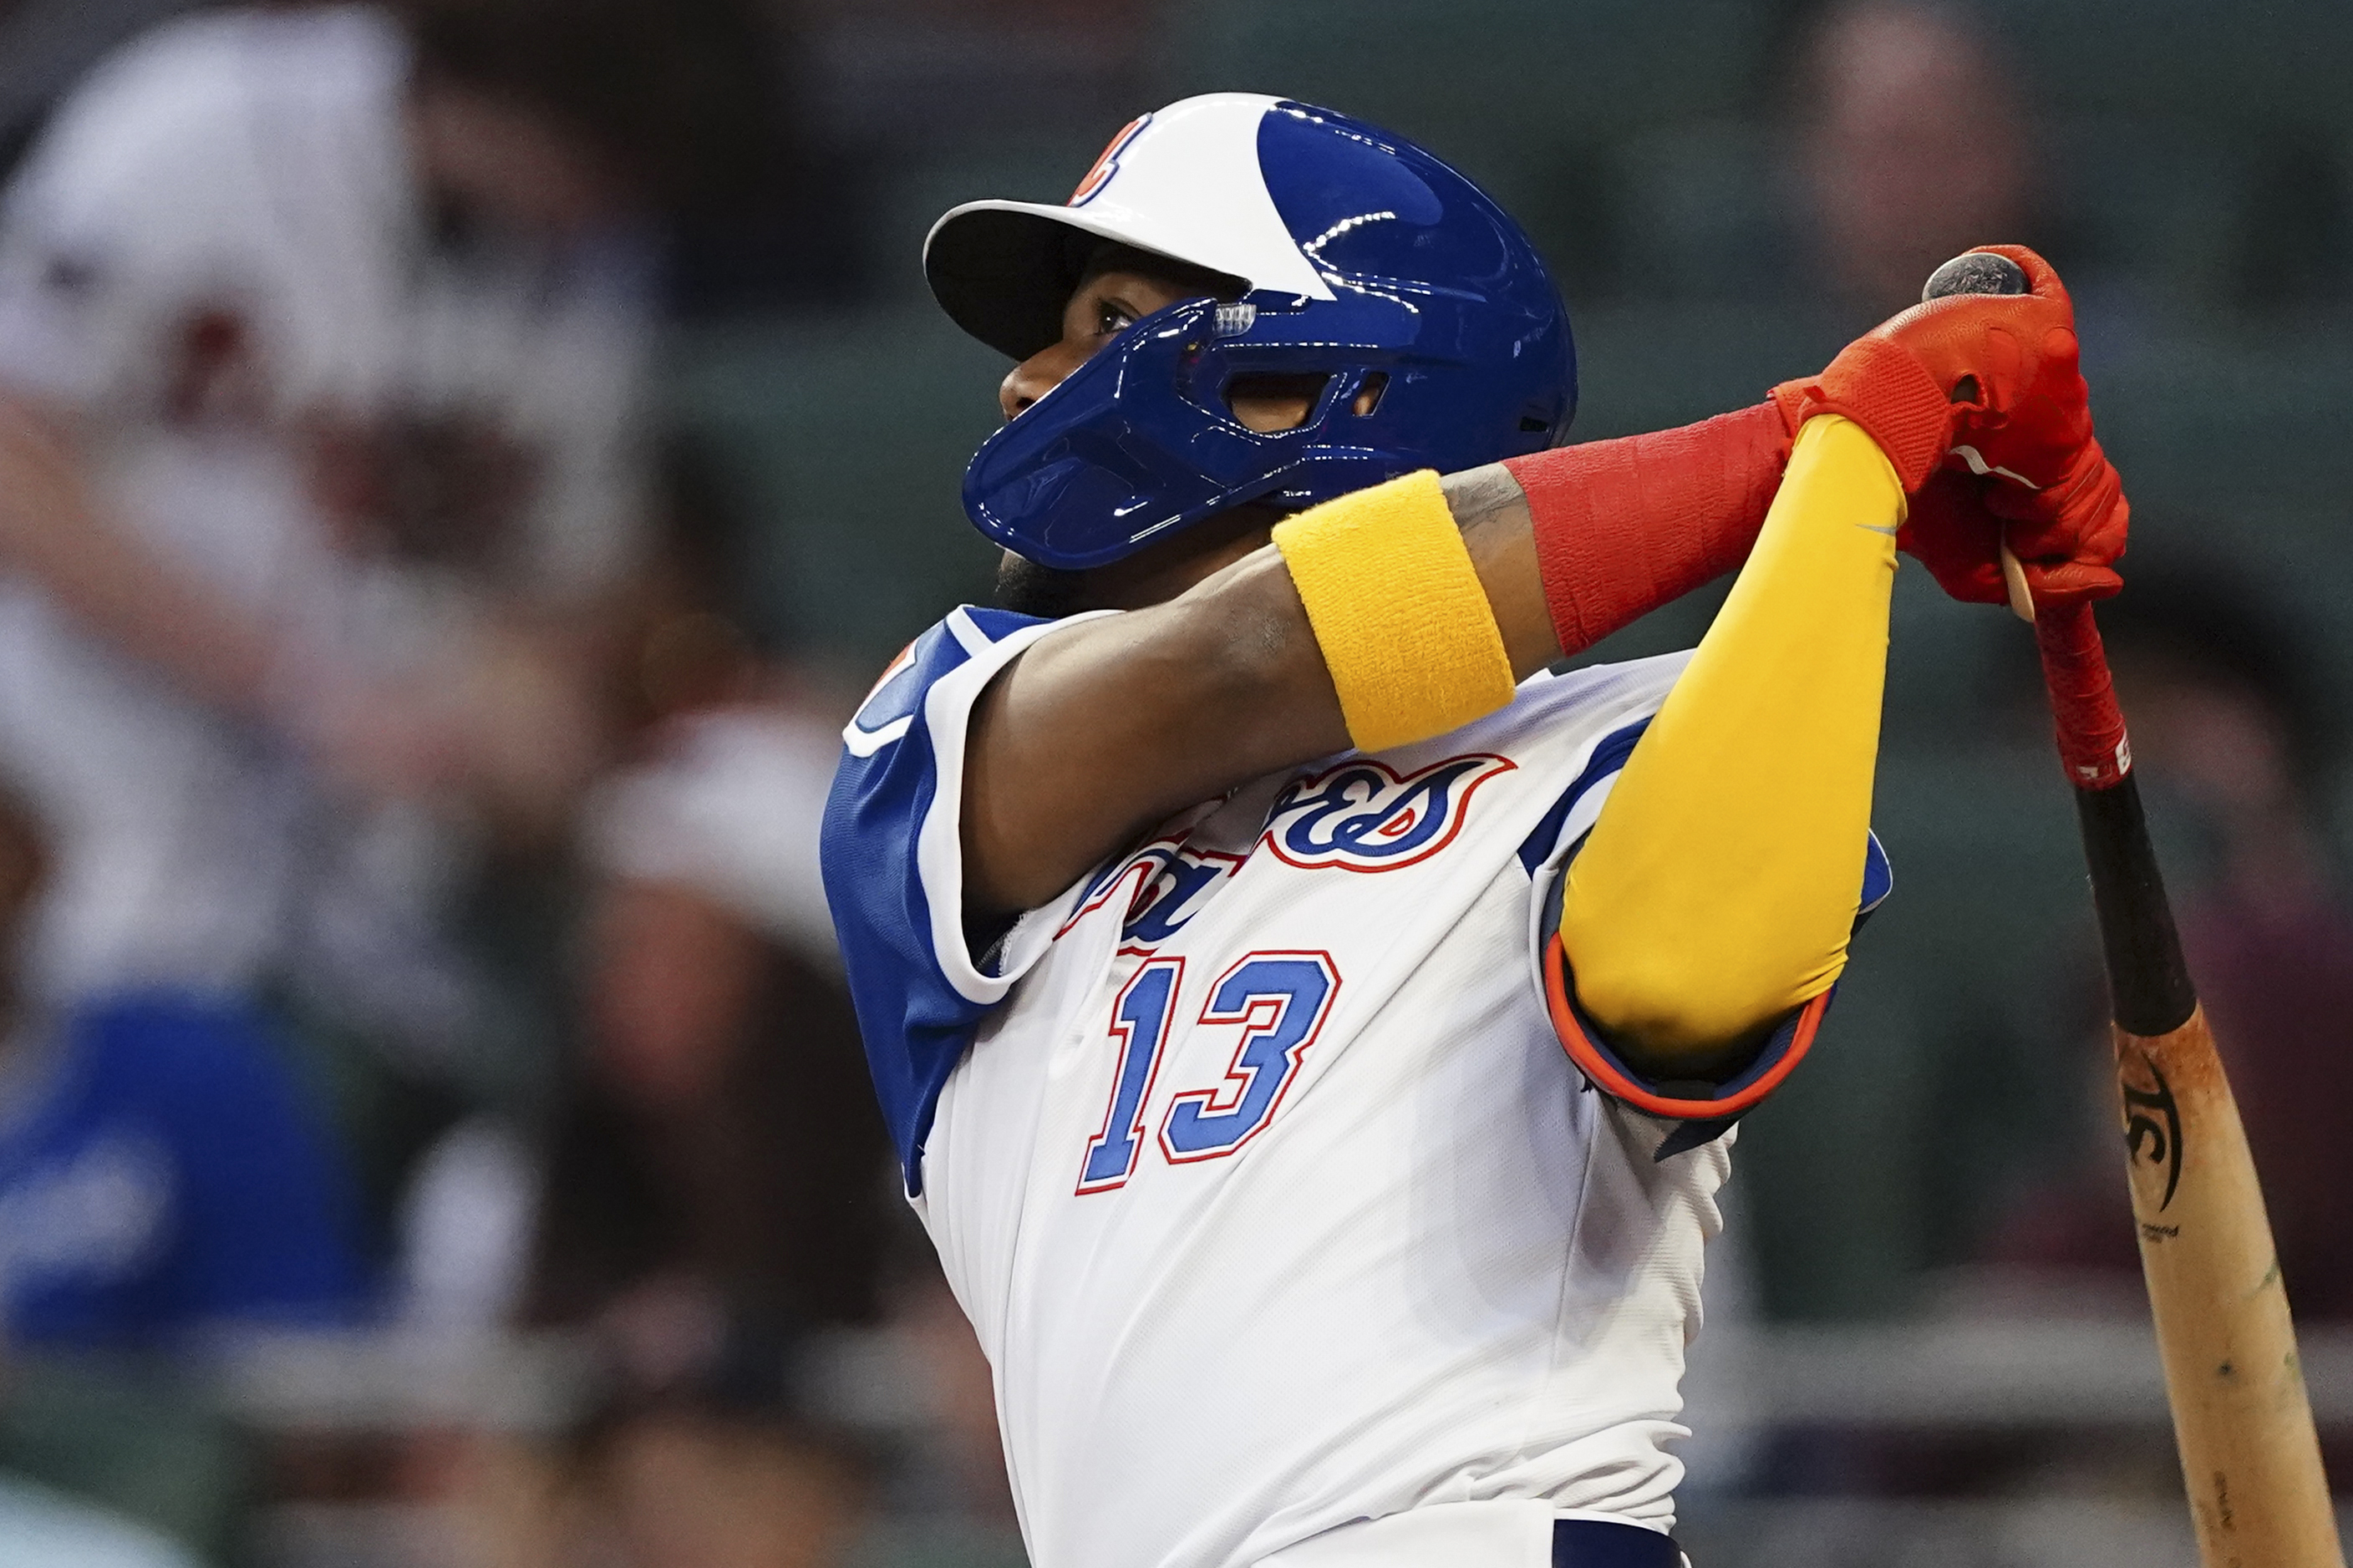 Cubs will face Ronald Acuna Jr. in his 2022 debut on Thursday night